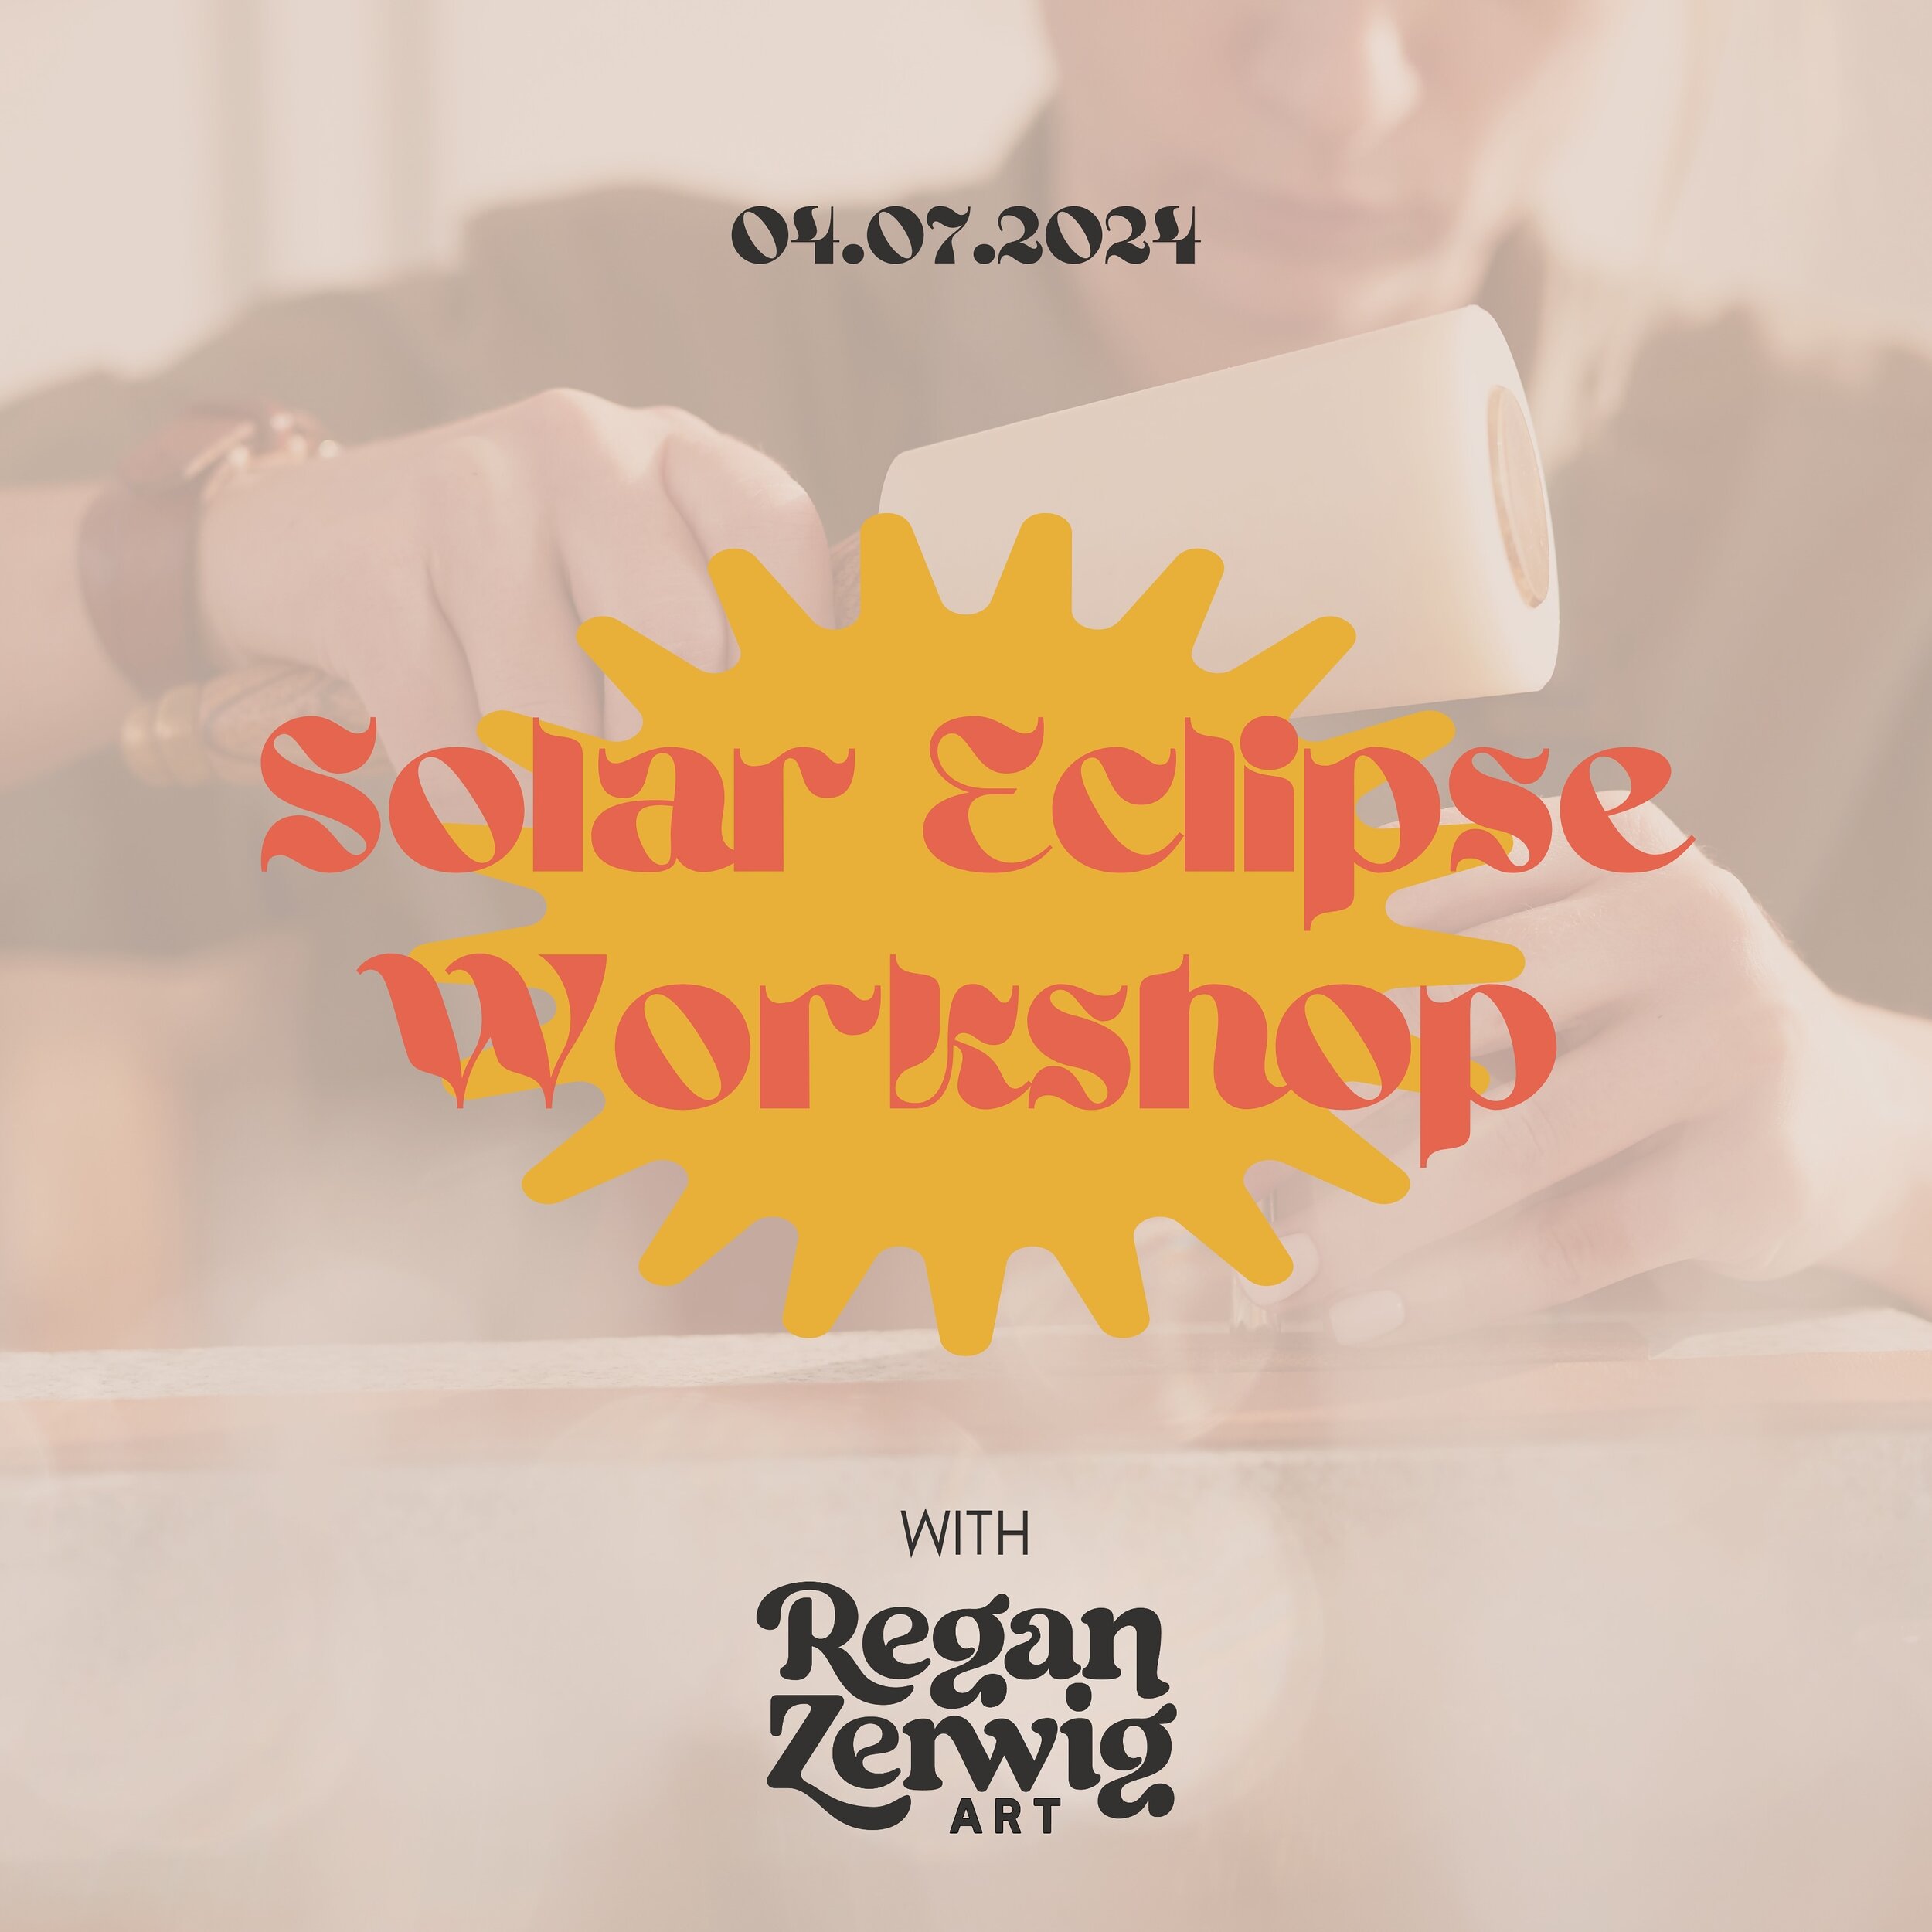 🌞✨ Only 4 WEEKS left to register and unleash your inner eclipse artist! 🎨 In my one-of-a-kind workshop, you&rsquo;ll craft your very own solar eclipse metal wall hanging! 🔨🌑 Let&rsquo;s turn that metal into celestial masterpieces! Sign up now bef